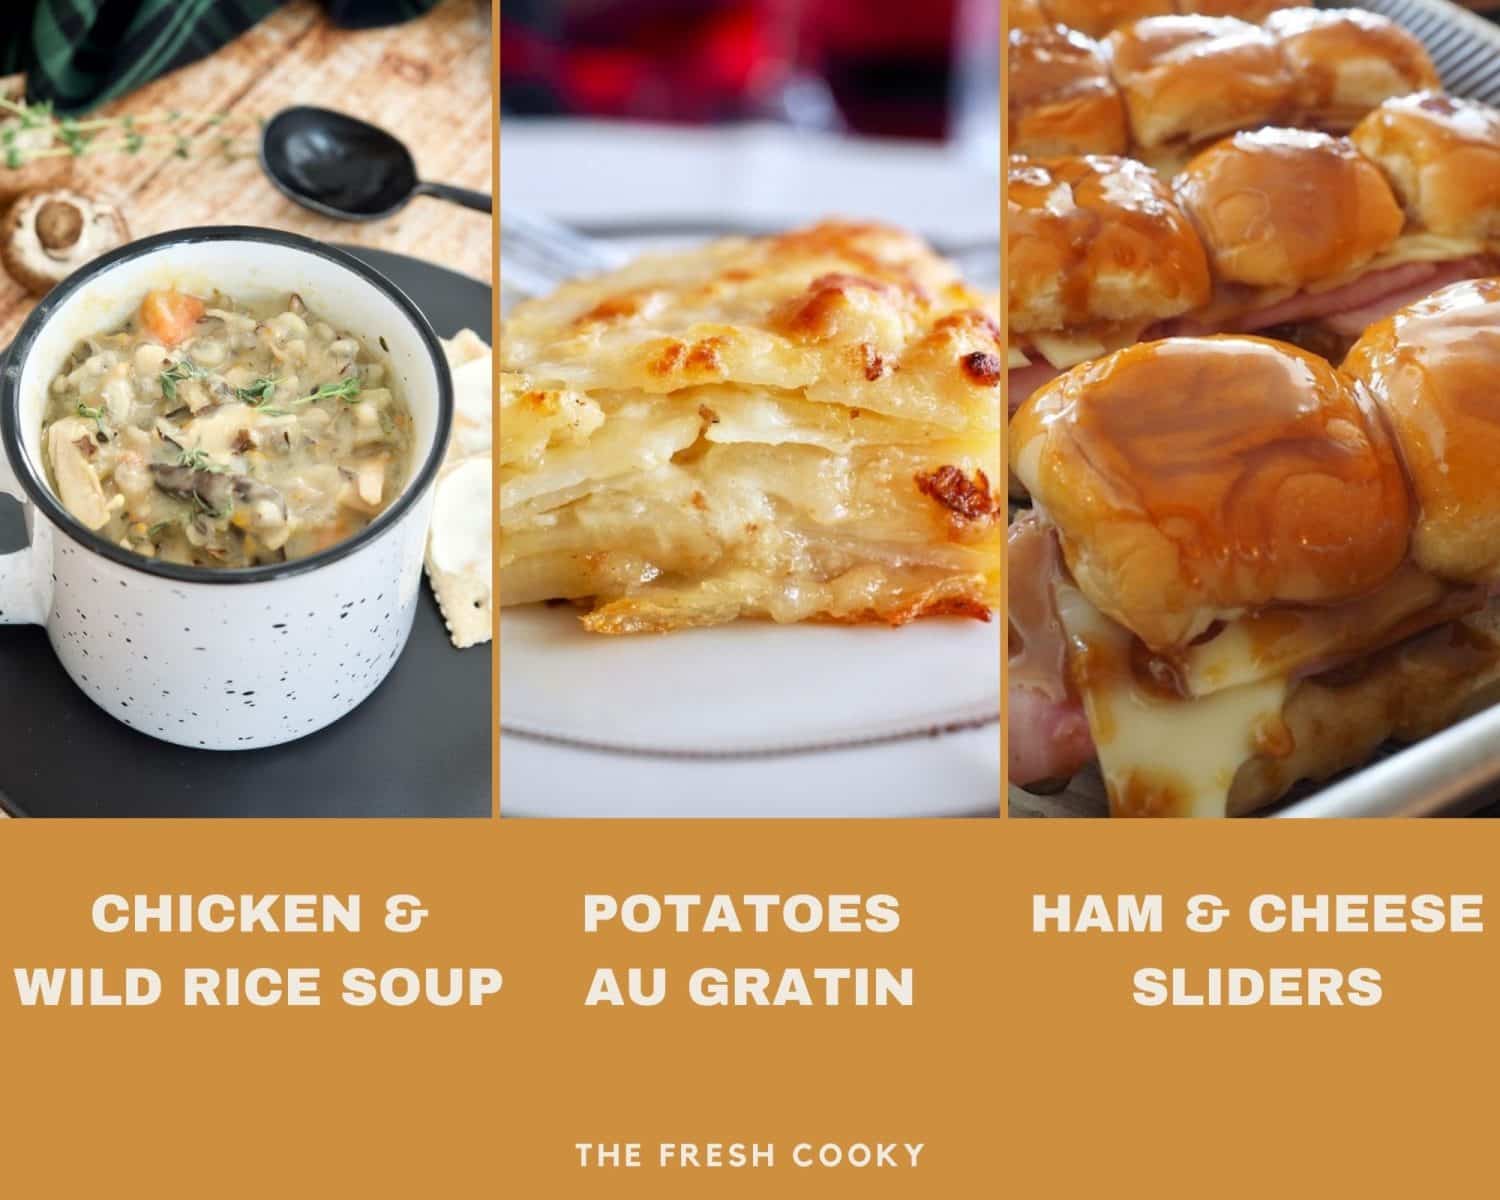 Three images of recipes 1) Chicken and Wild Rice Soup, 2) Potatoes Au Gratin 3) ham & cheese sliders.